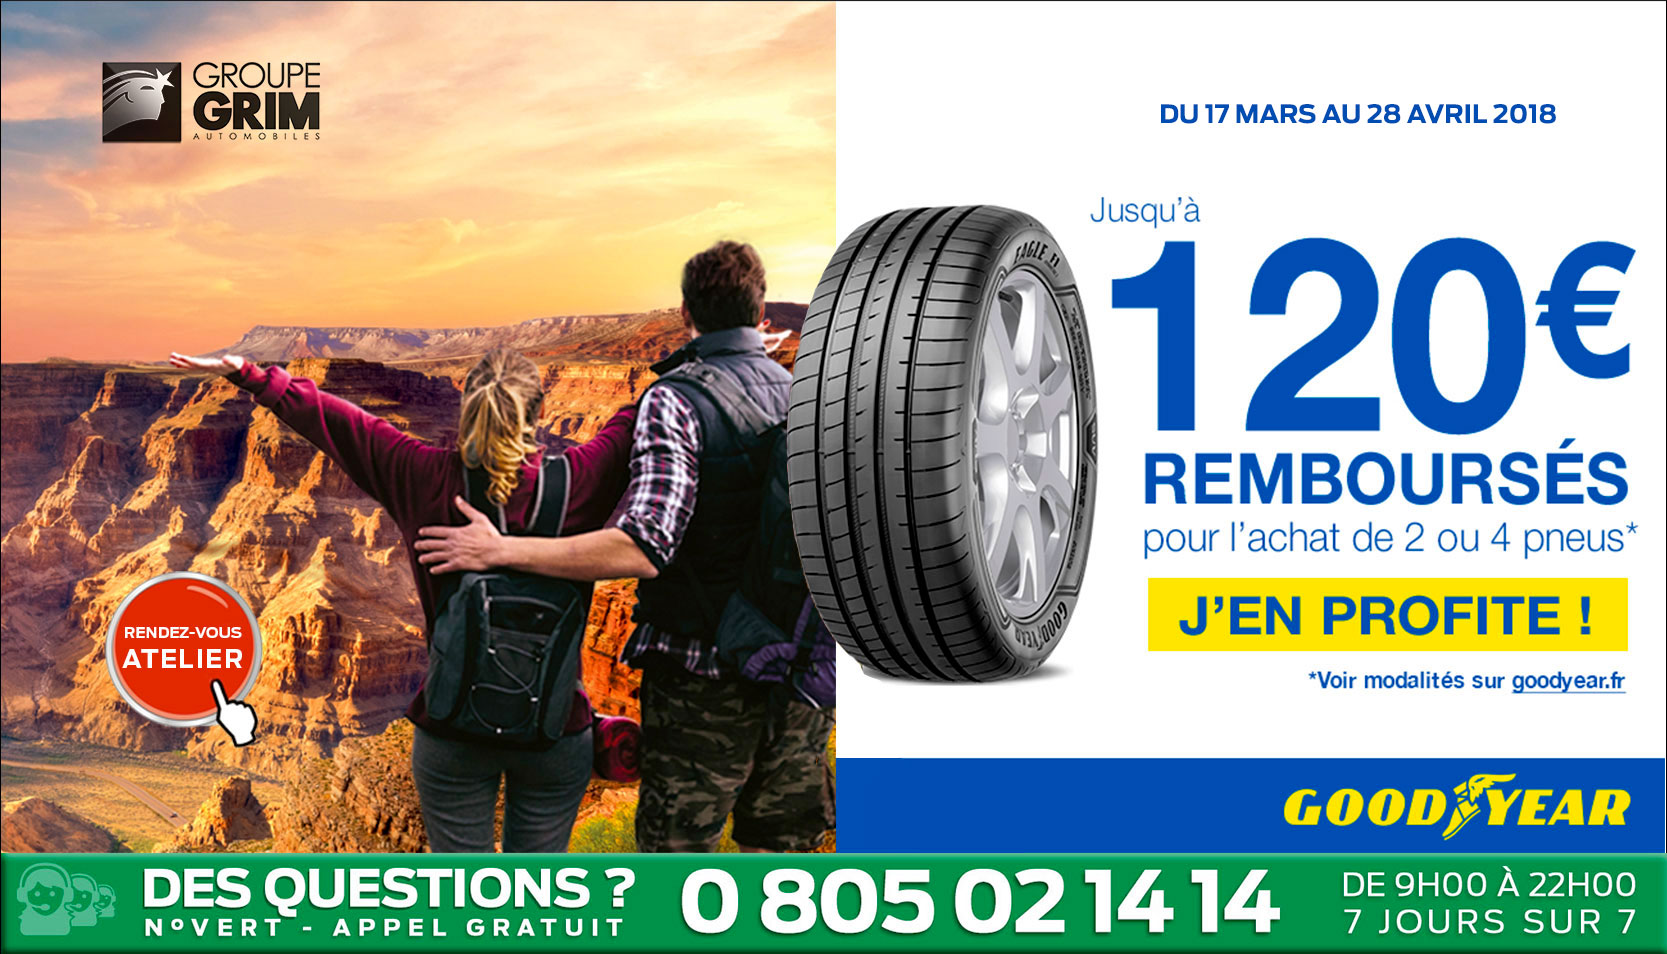 OFFRE GOODYEAR : JUSQU'A 120€ REMBOURSES 3 GOODYEAR 1 3